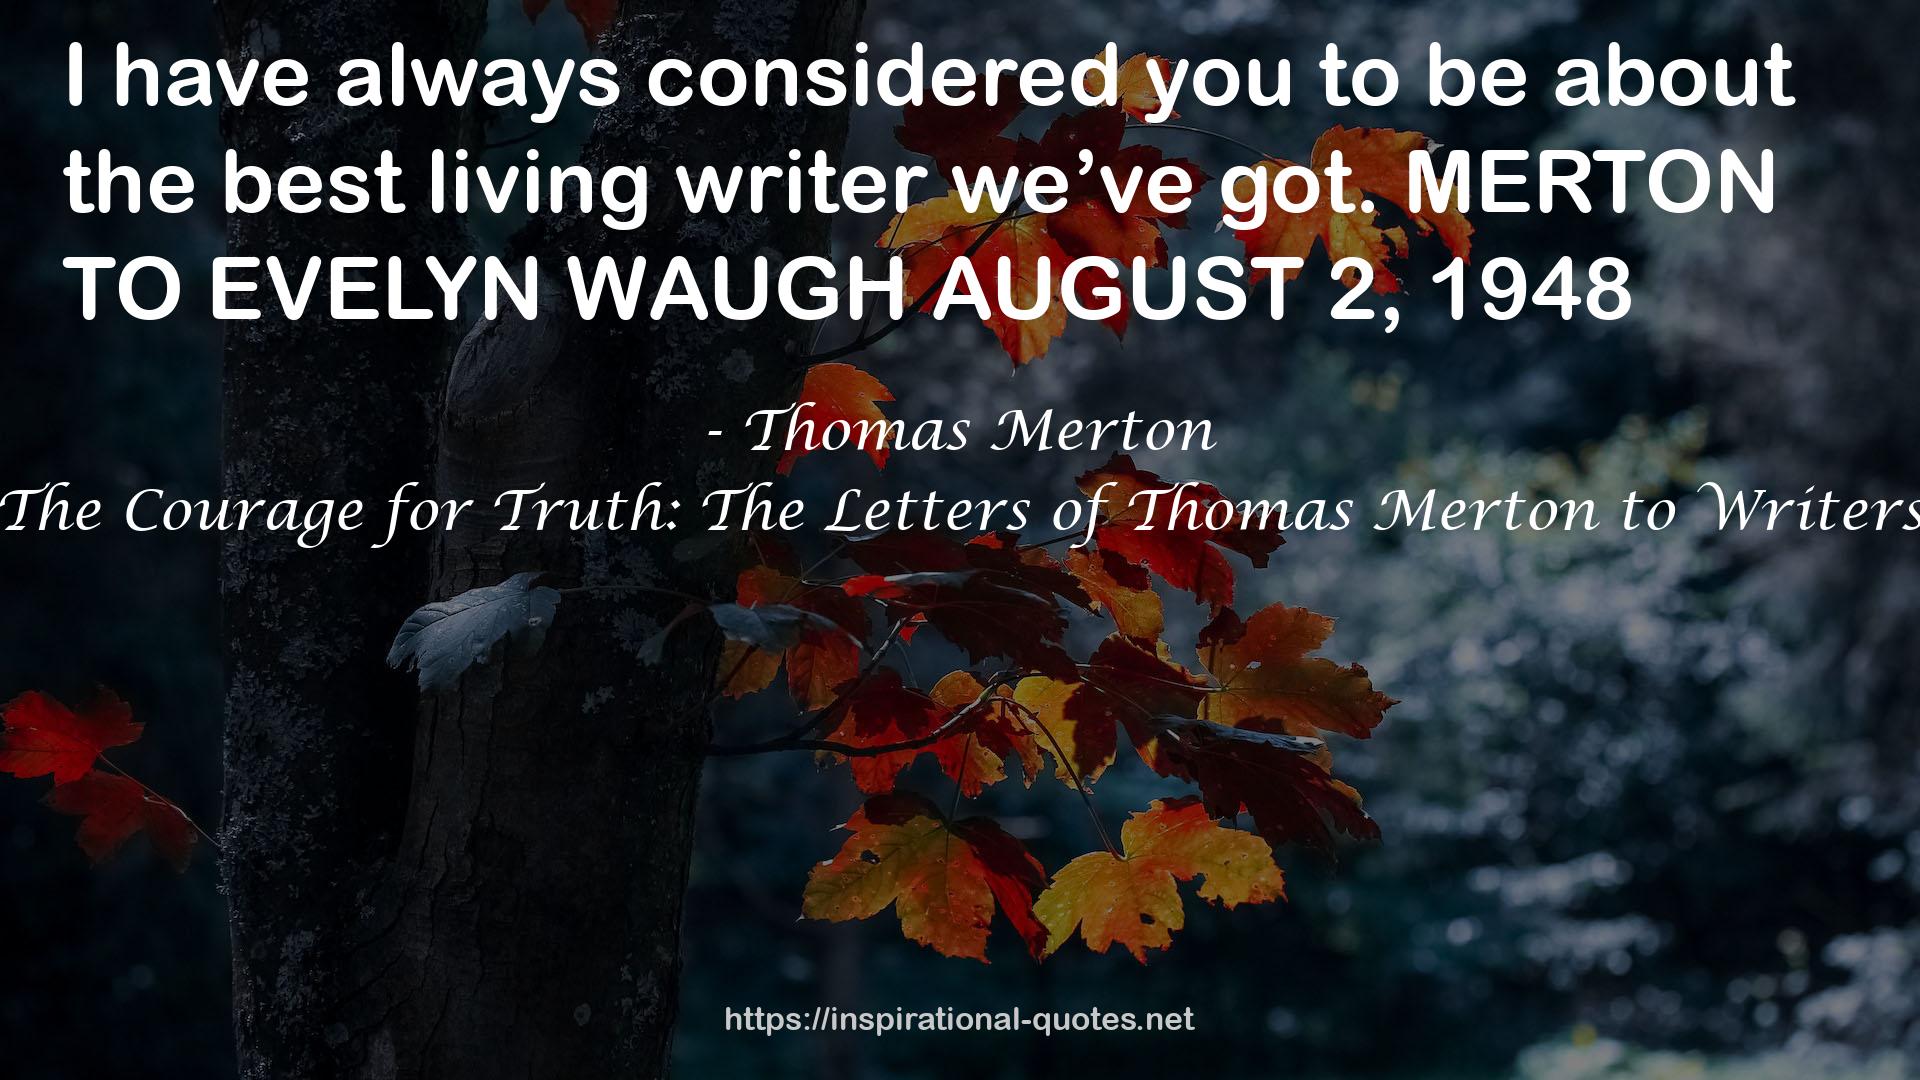 The Courage for Truth: The Letters of Thomas Merton to Writers QUOTES